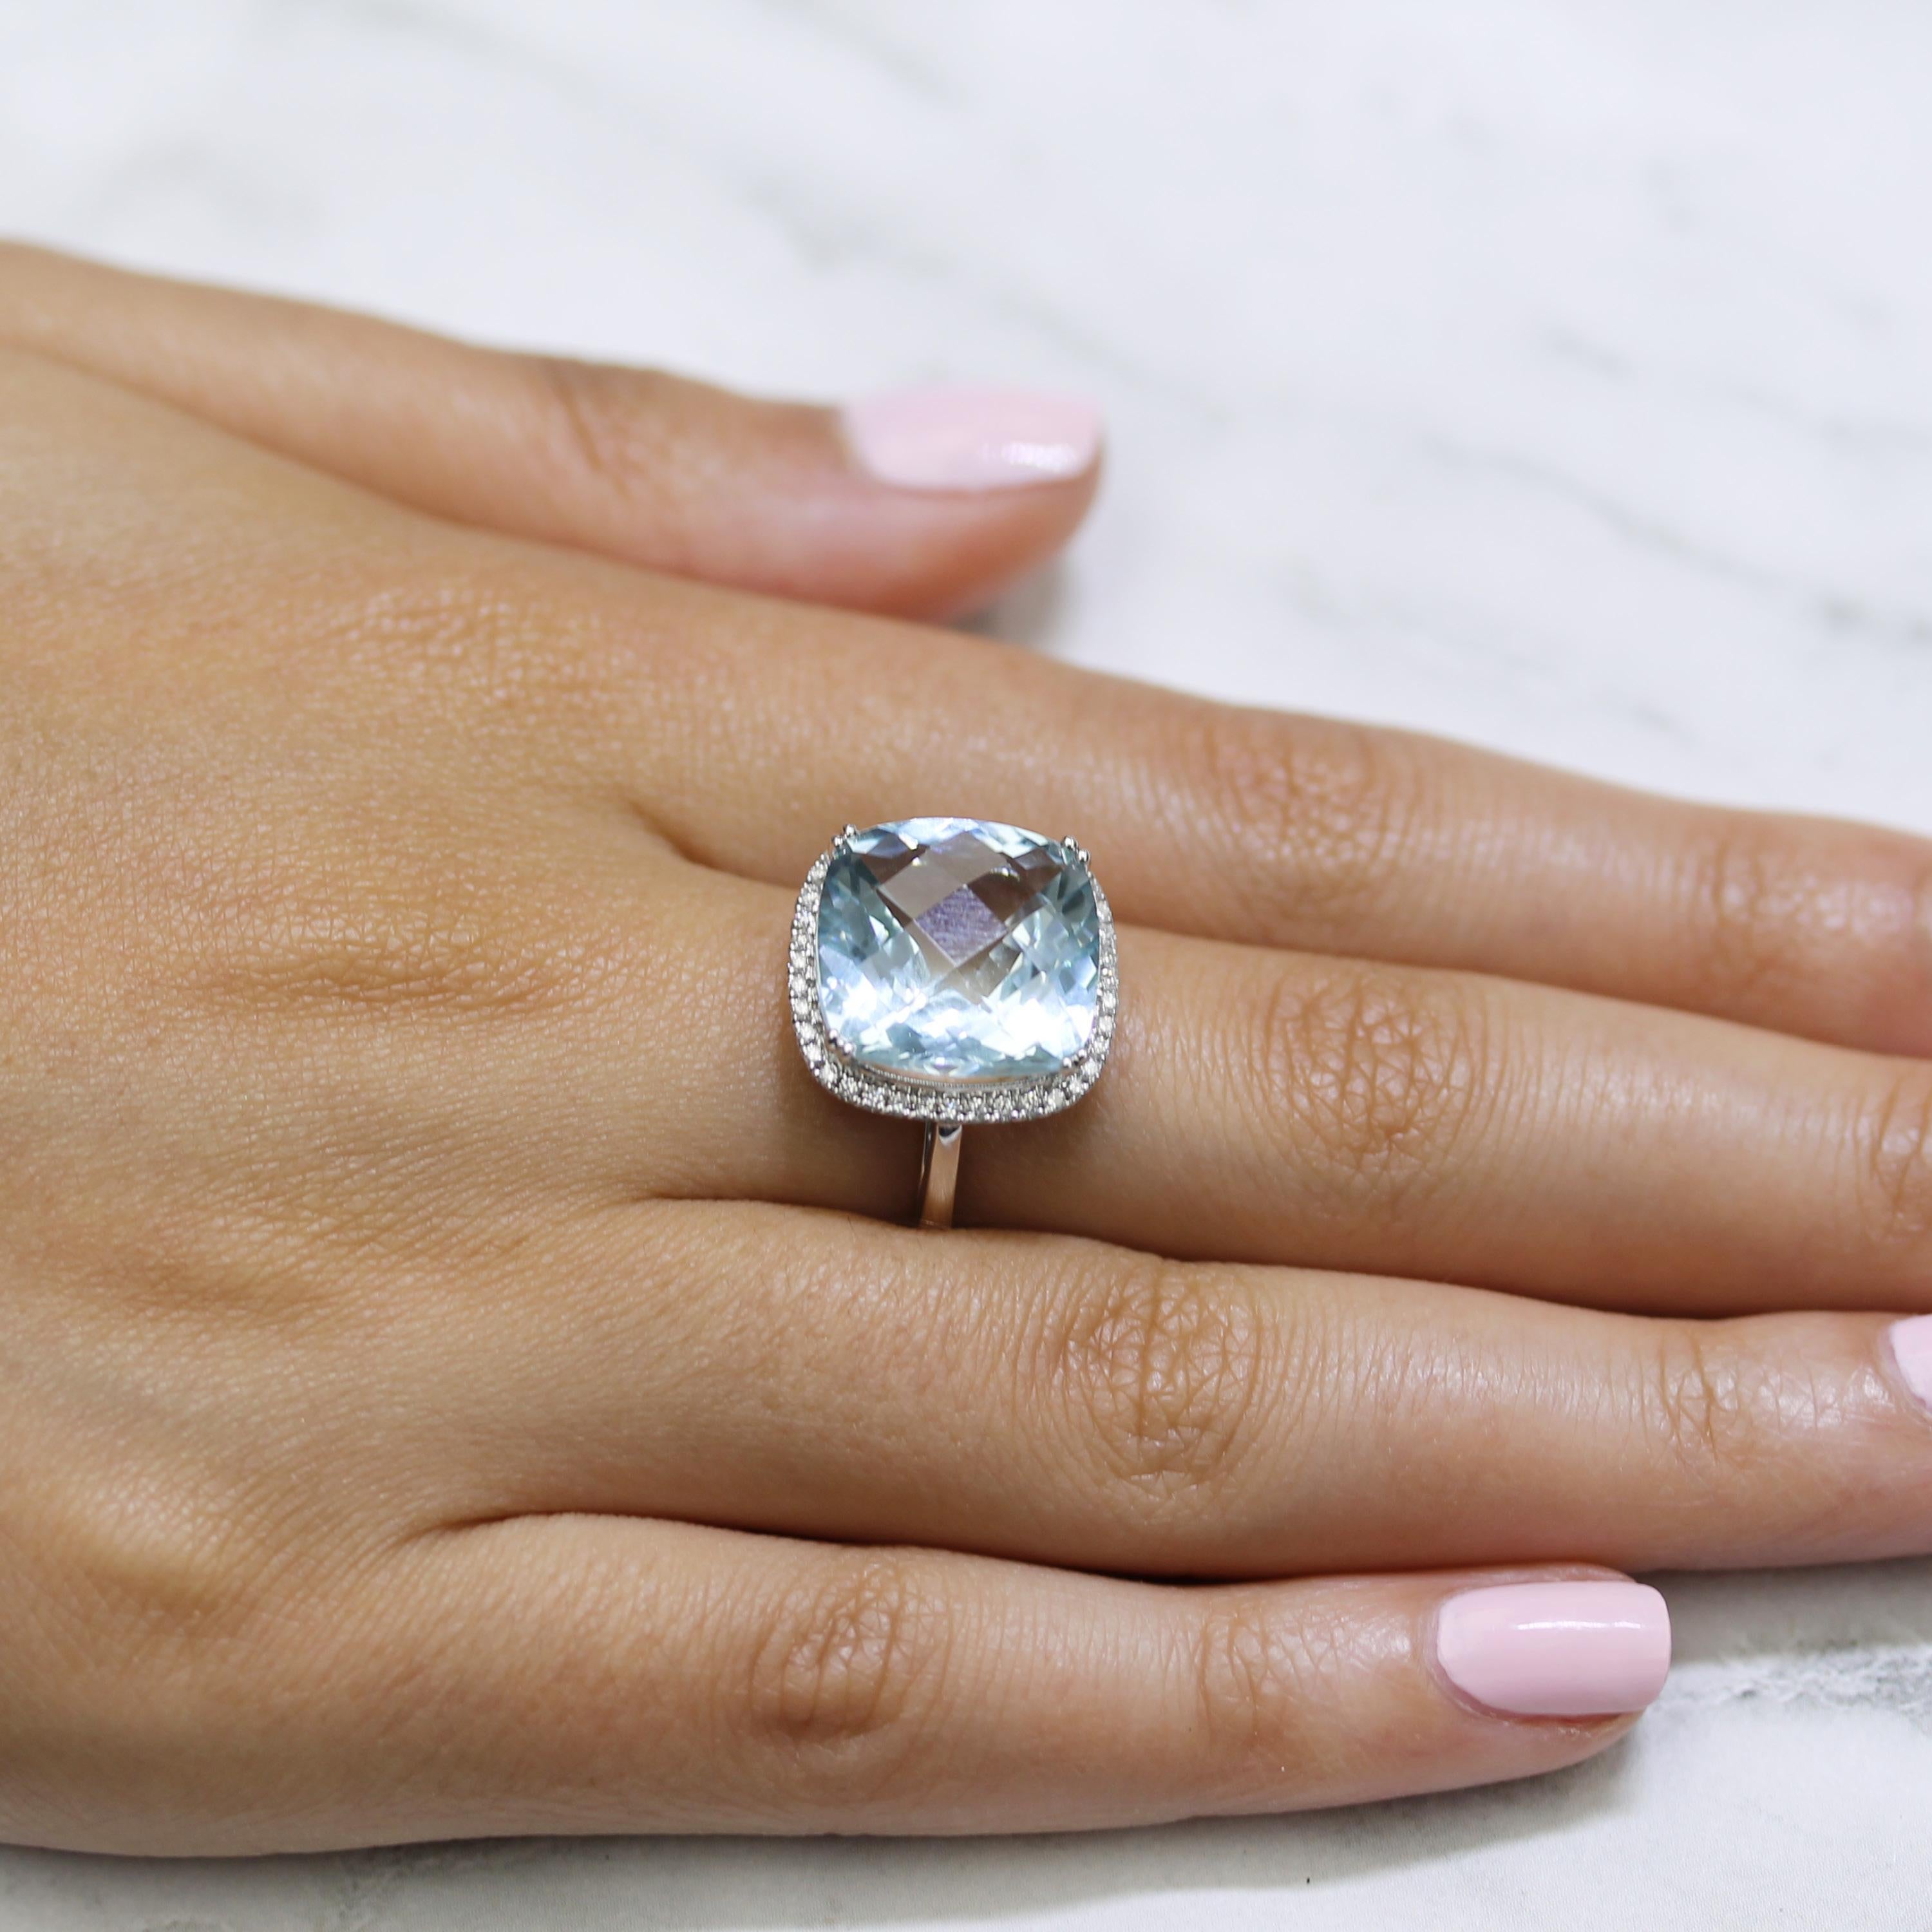 18K White Gold Ring Featuring Cushion-Cut Aquamarine, and Diamond Halo. Finger size 6.5, adjustable upon request/quote. Aquamarine evokes the purity of crystalline waters, and the exhilaration and relaxation of the sea. Item ref. R9498AQ.

Stone